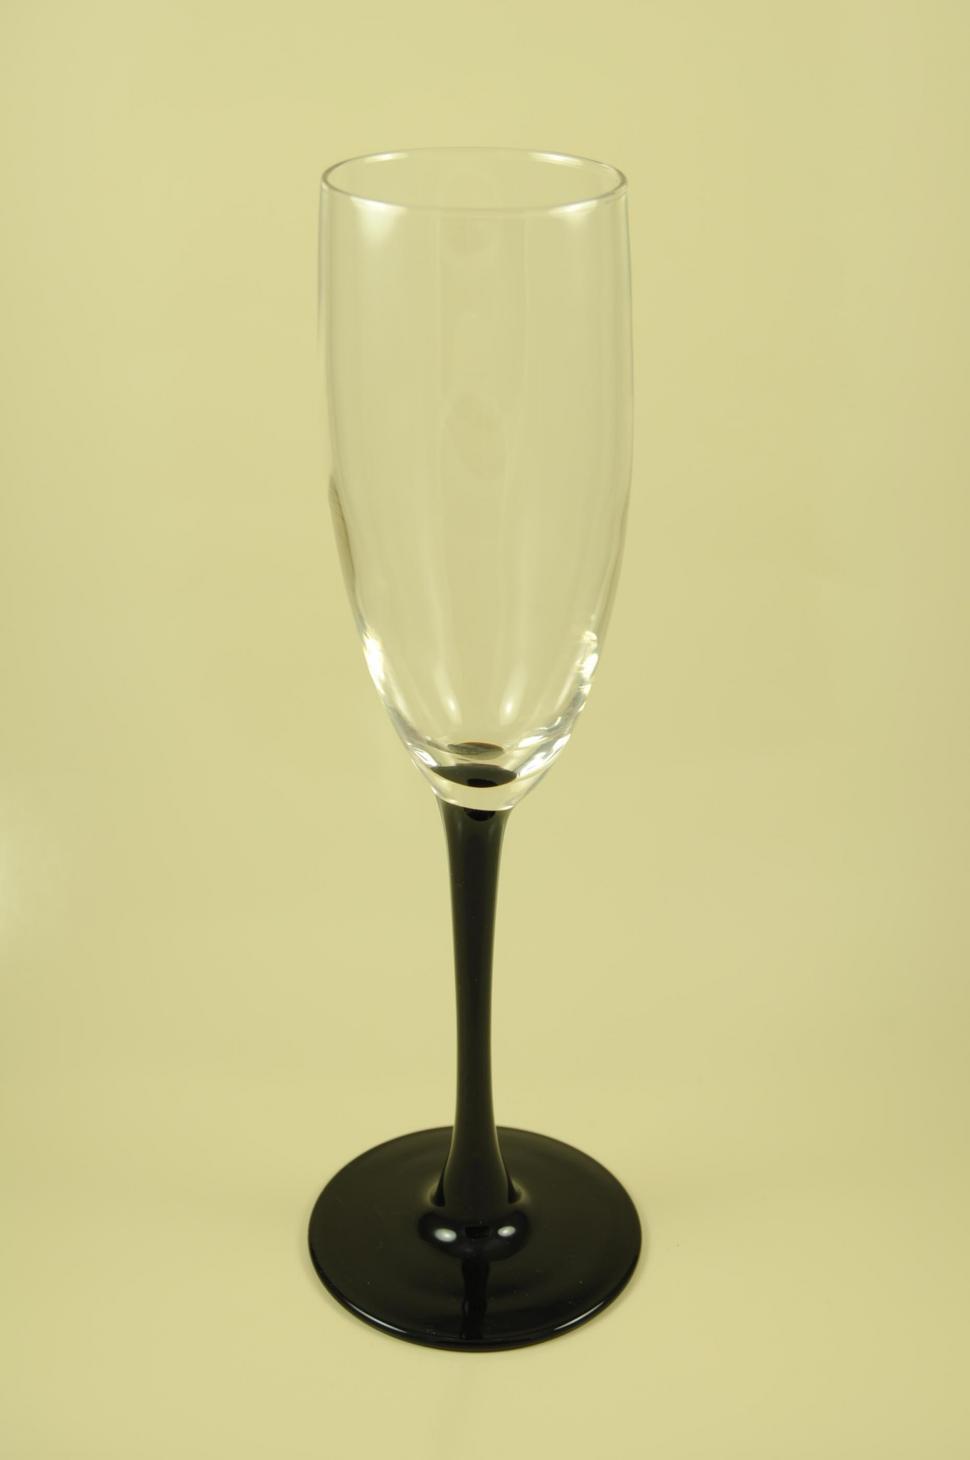 Free Image of Champagne flute 